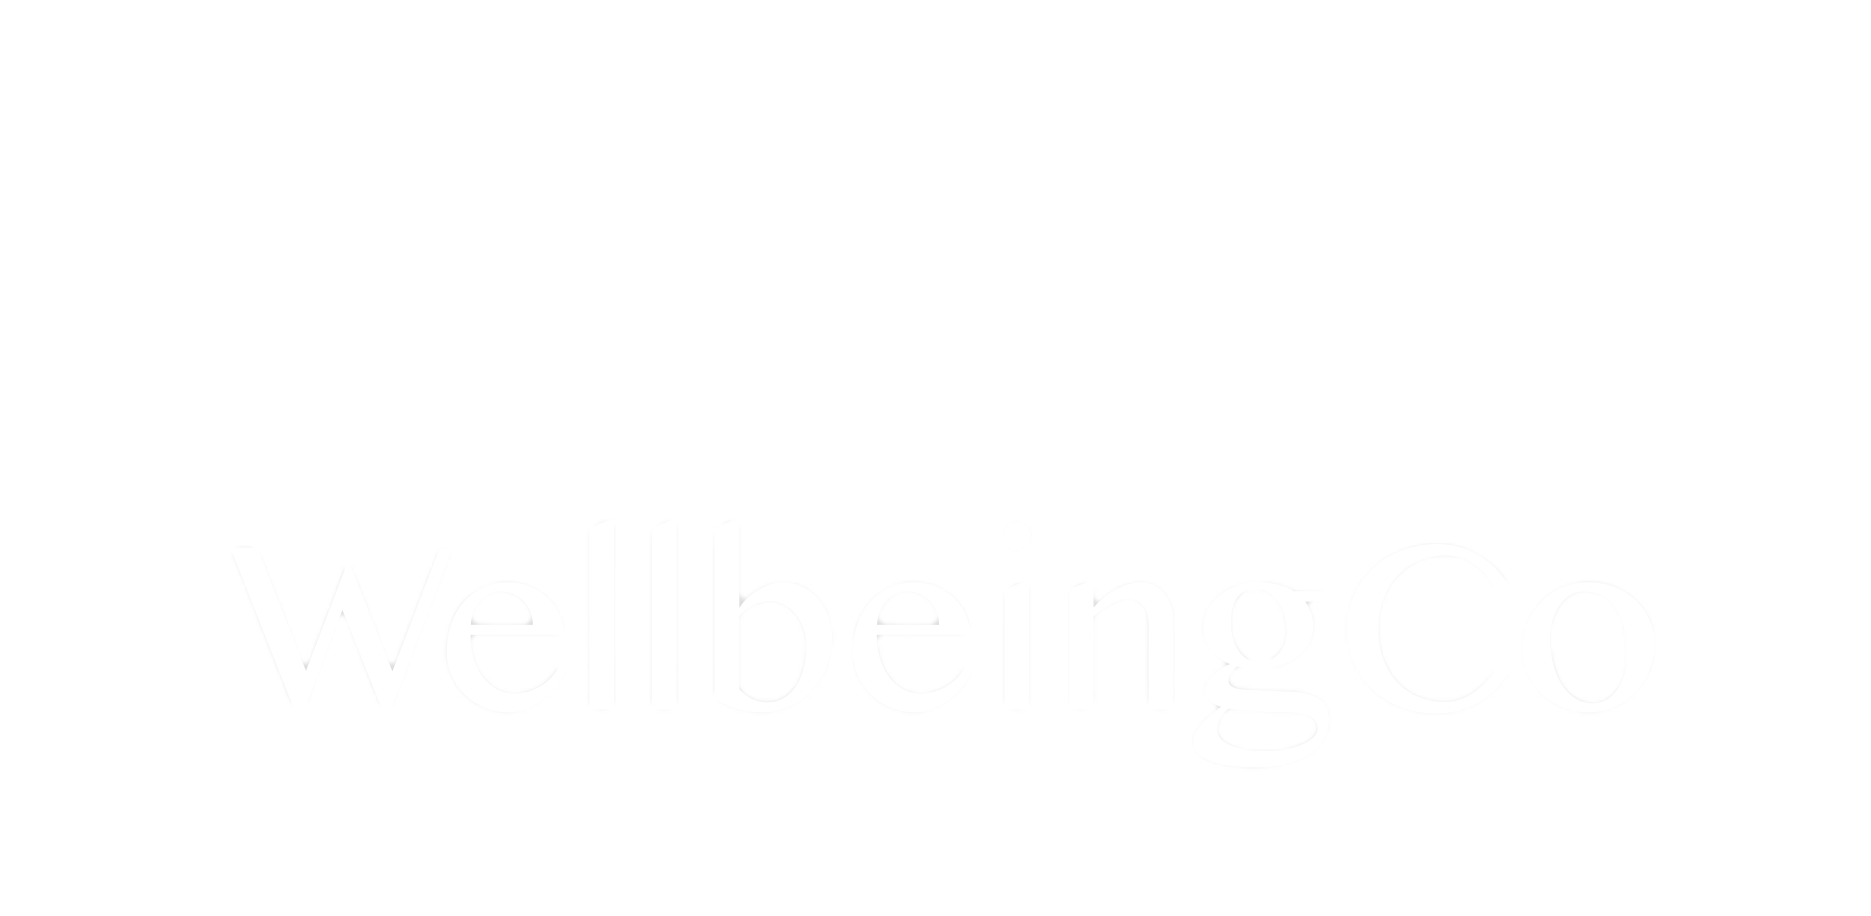 PURE WELLBEINGCO